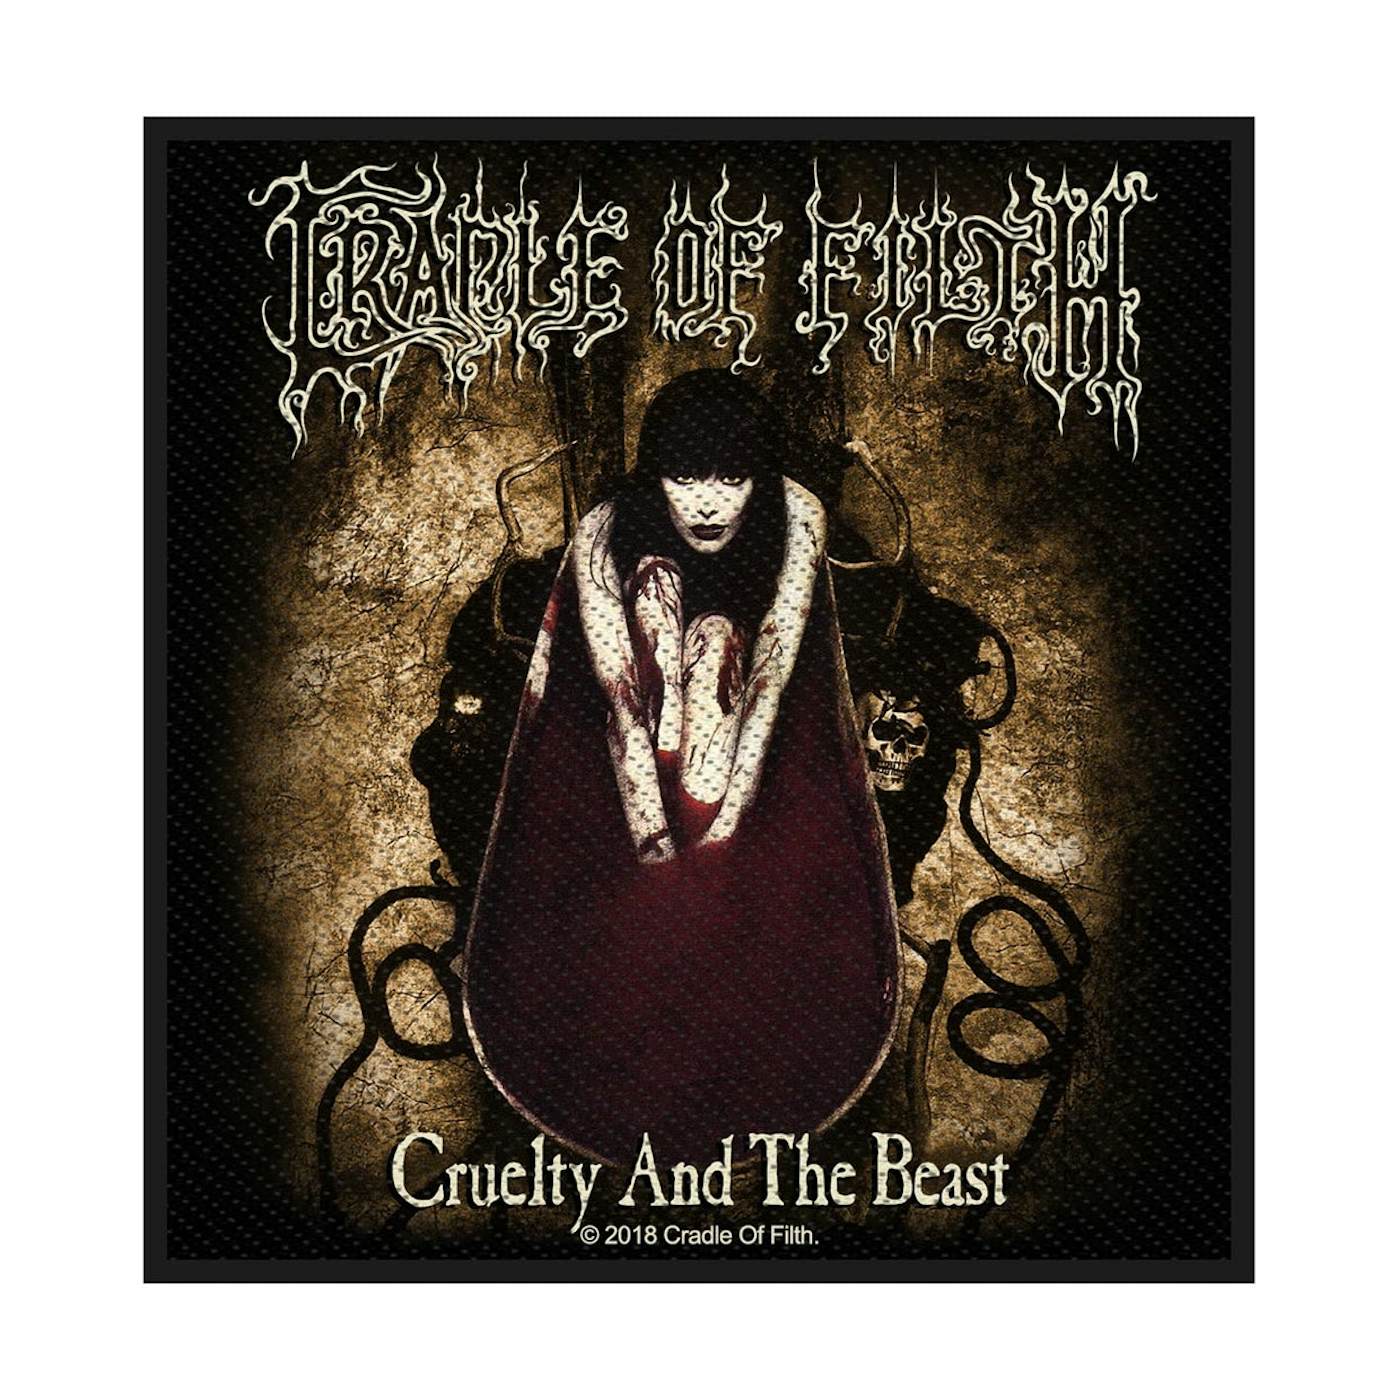 Cradle Of Filth Sew-On Patch - Cruelty And The Beast